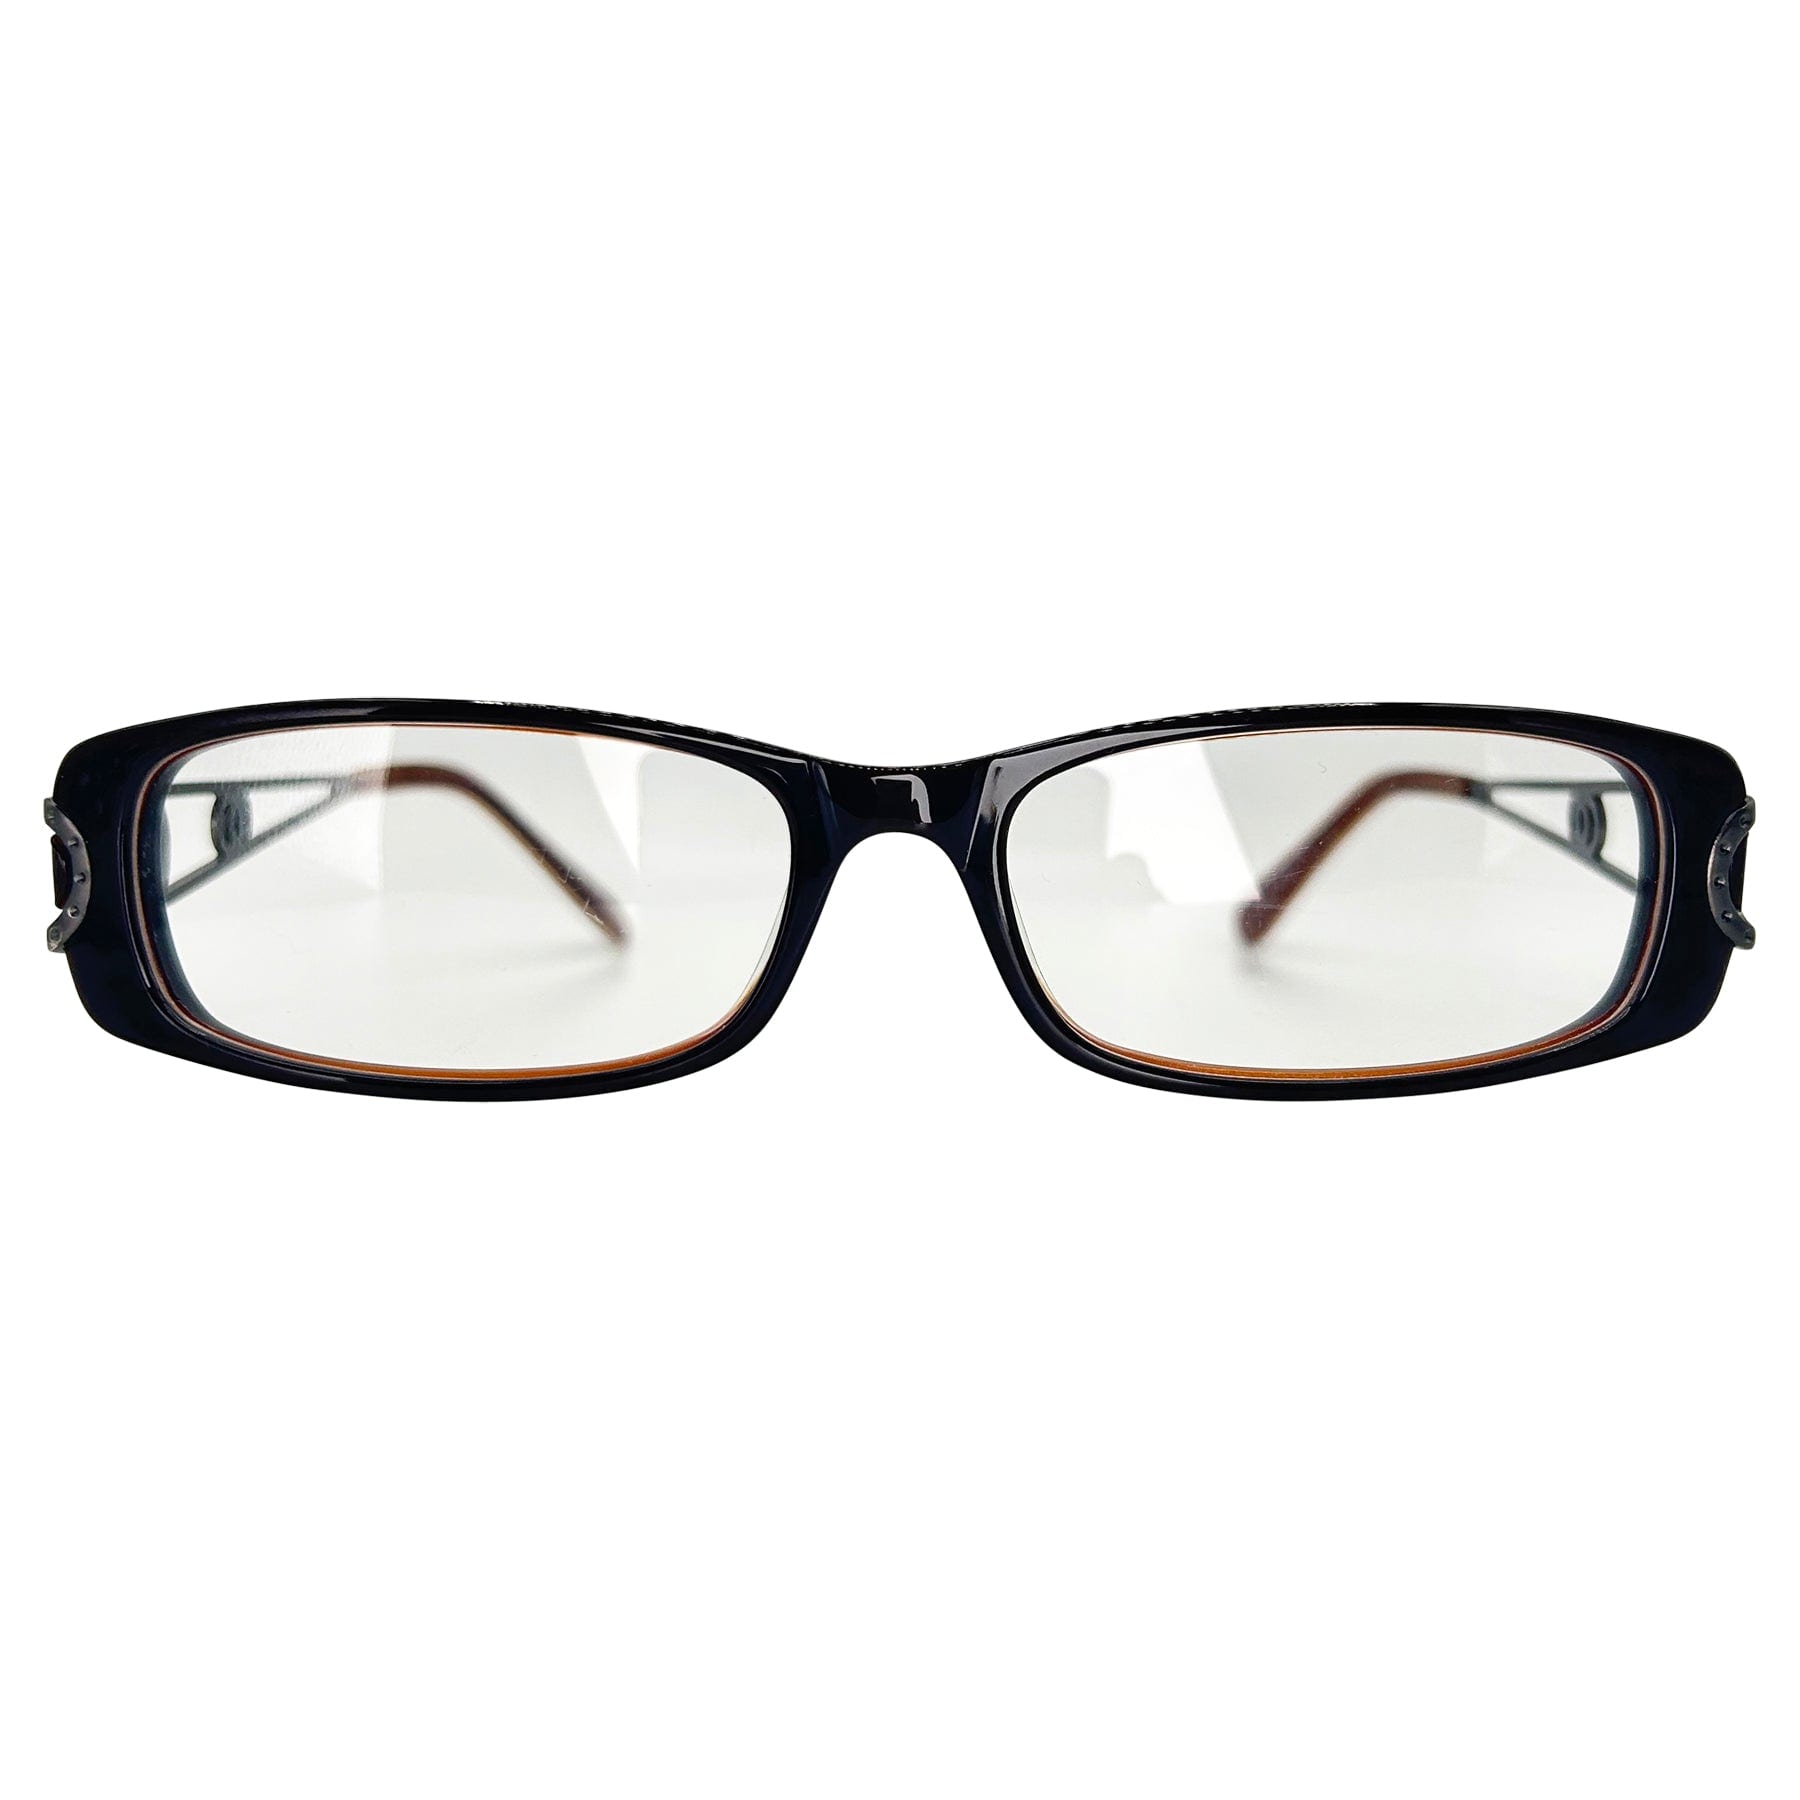 vintage frames with a 90s style and clear lens